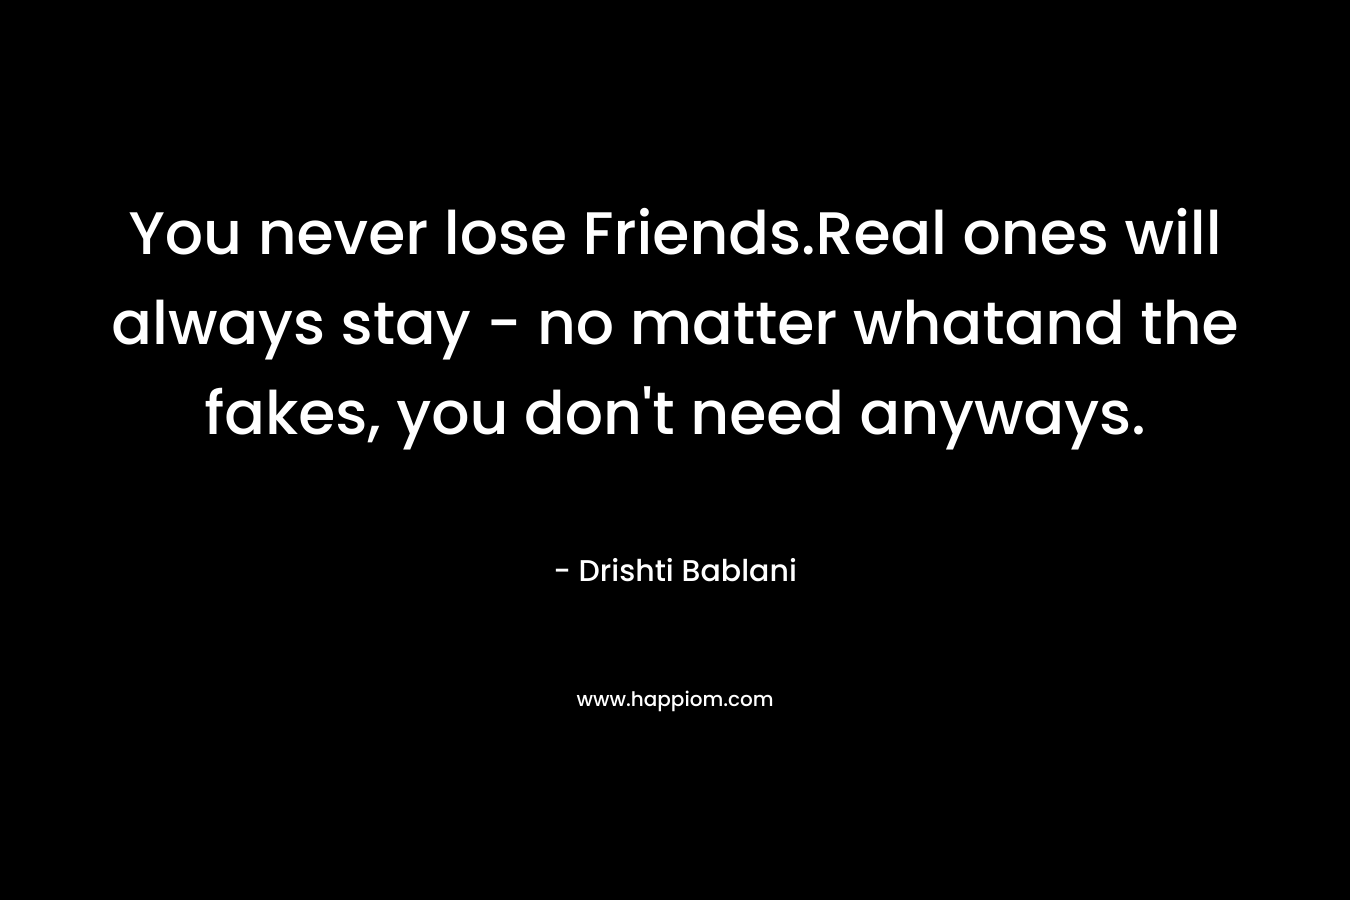 You never lose Friends.Real ones will always stay - no matter whatand the fakes, you don't need anyways.